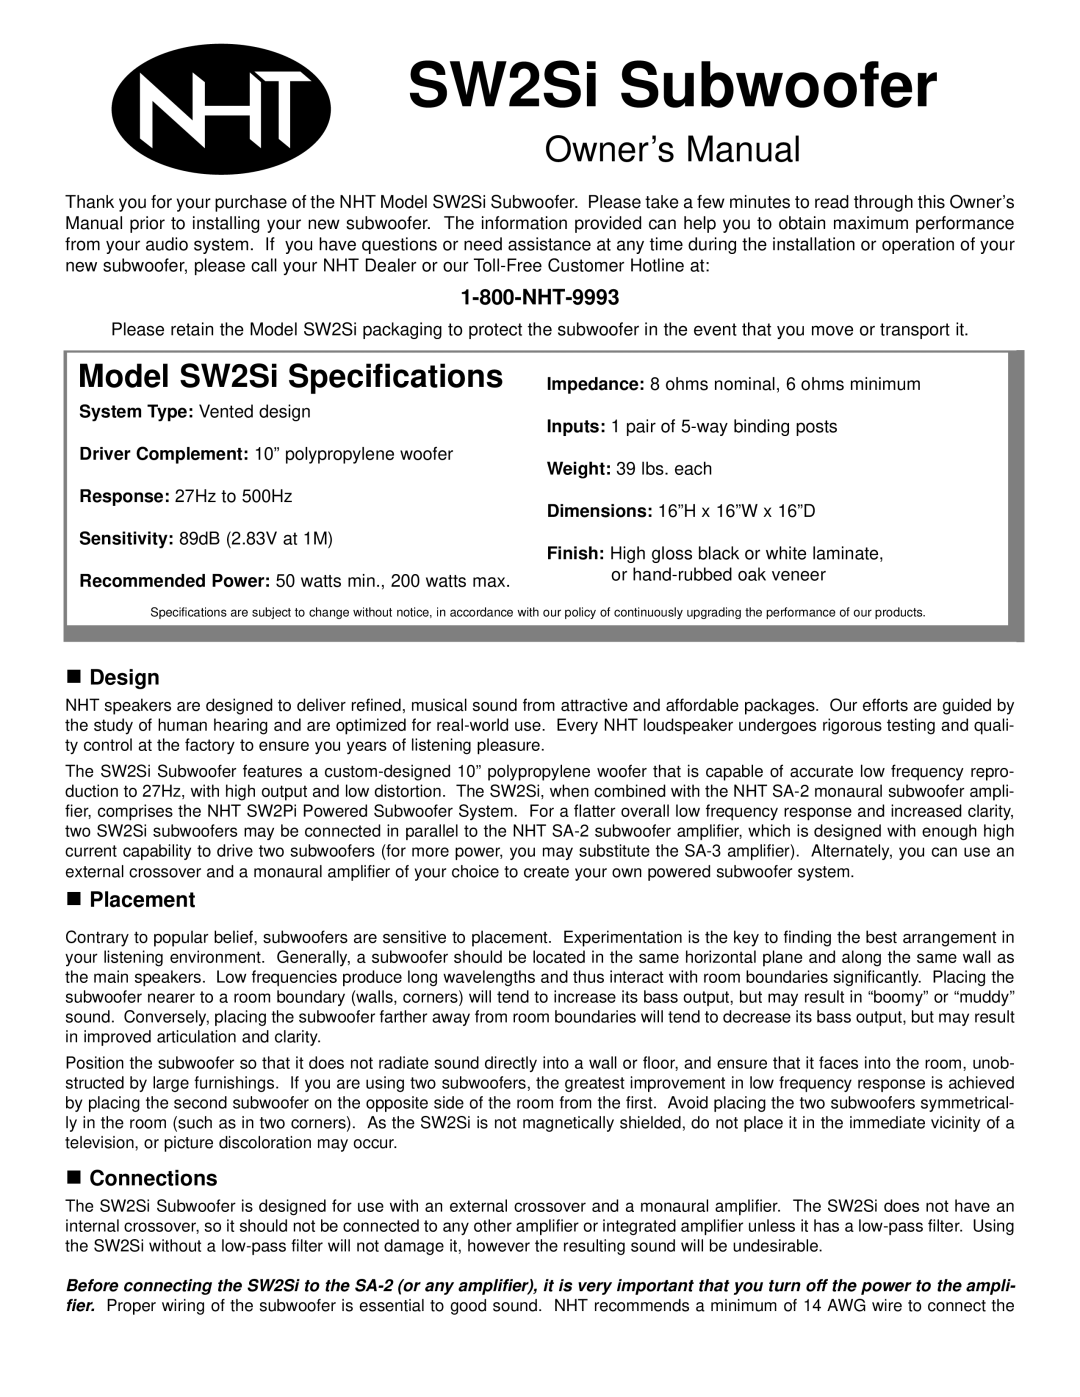 NHT SW2SI owner manual Design, Placement, Connections, SW2Si Subwoofer, Model SW2Si Specifications 